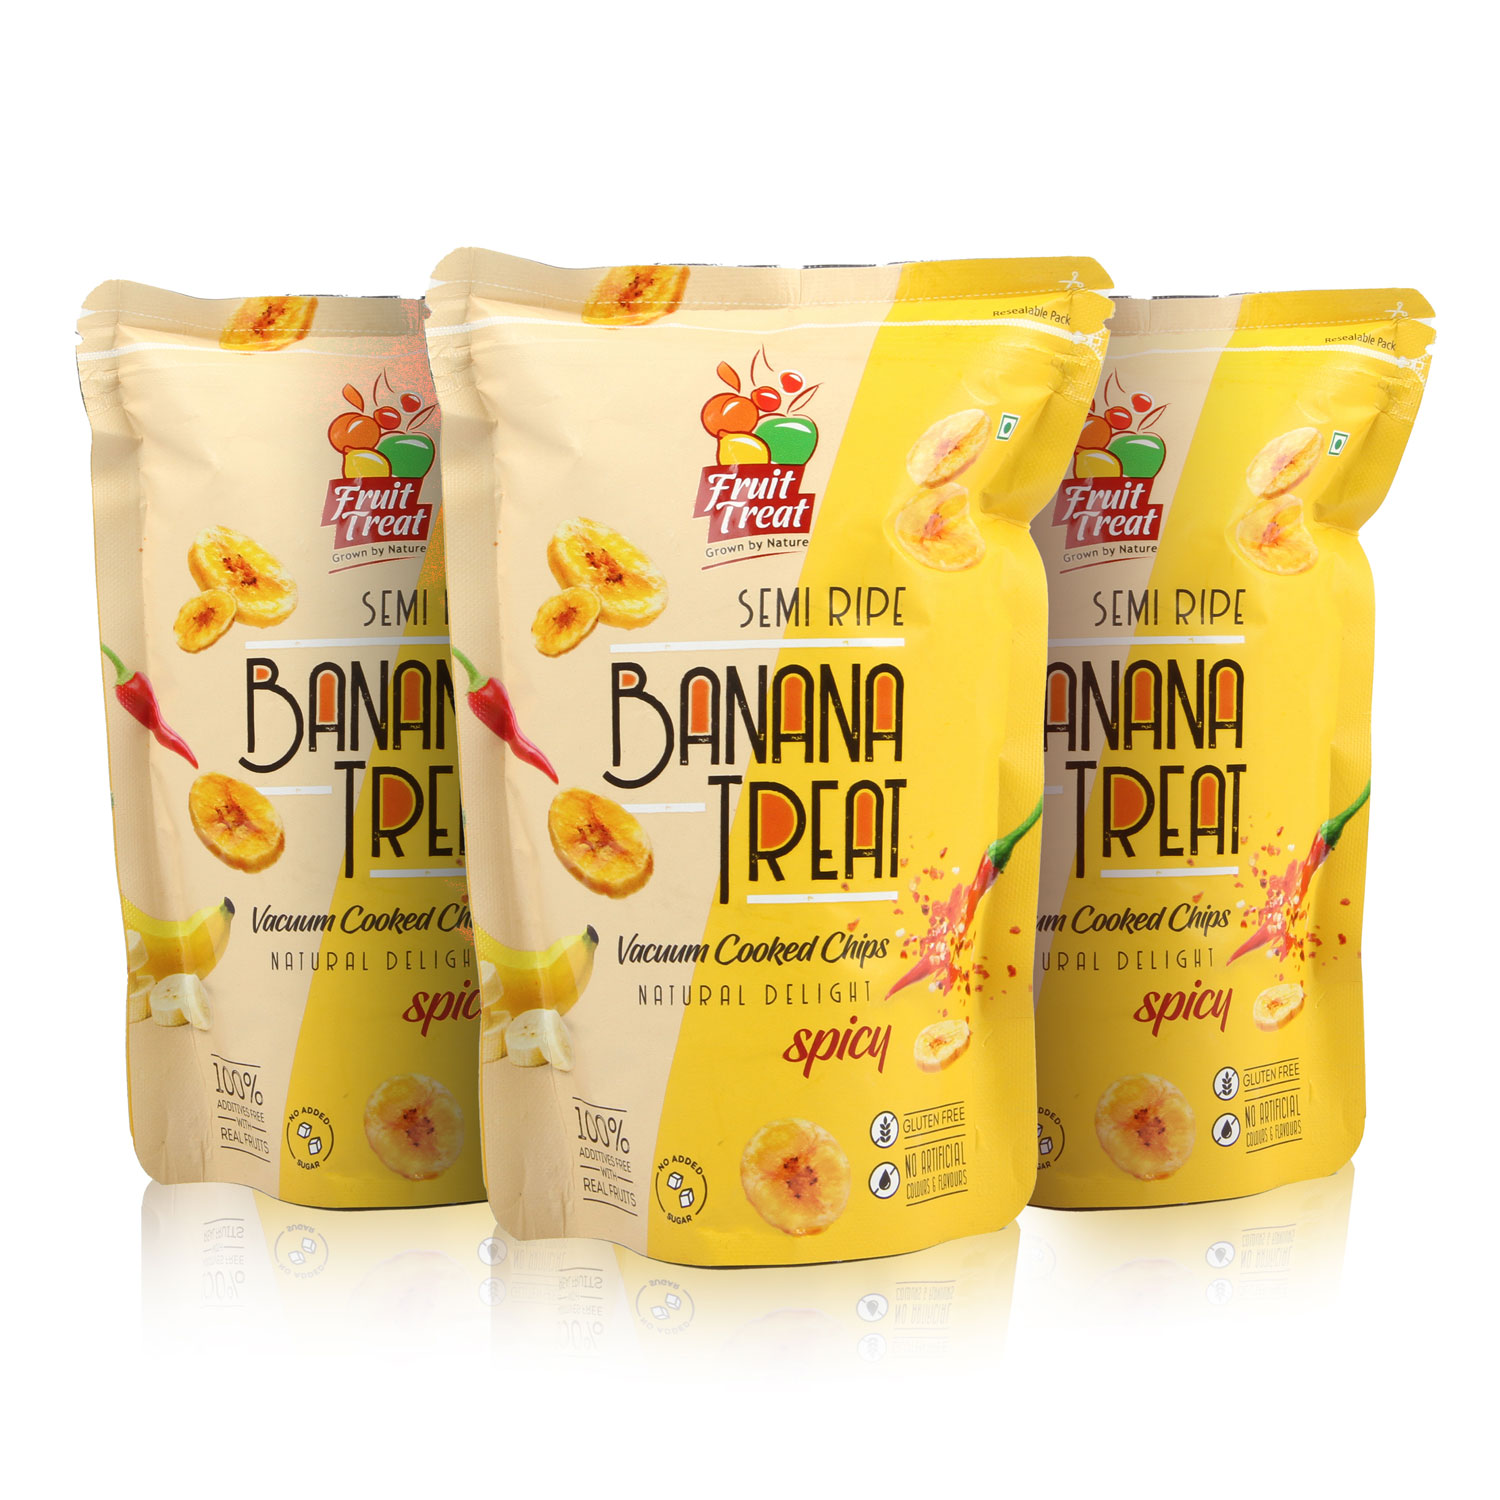 Vacuum Fried Banana Spicy Treat Combo pack of 3